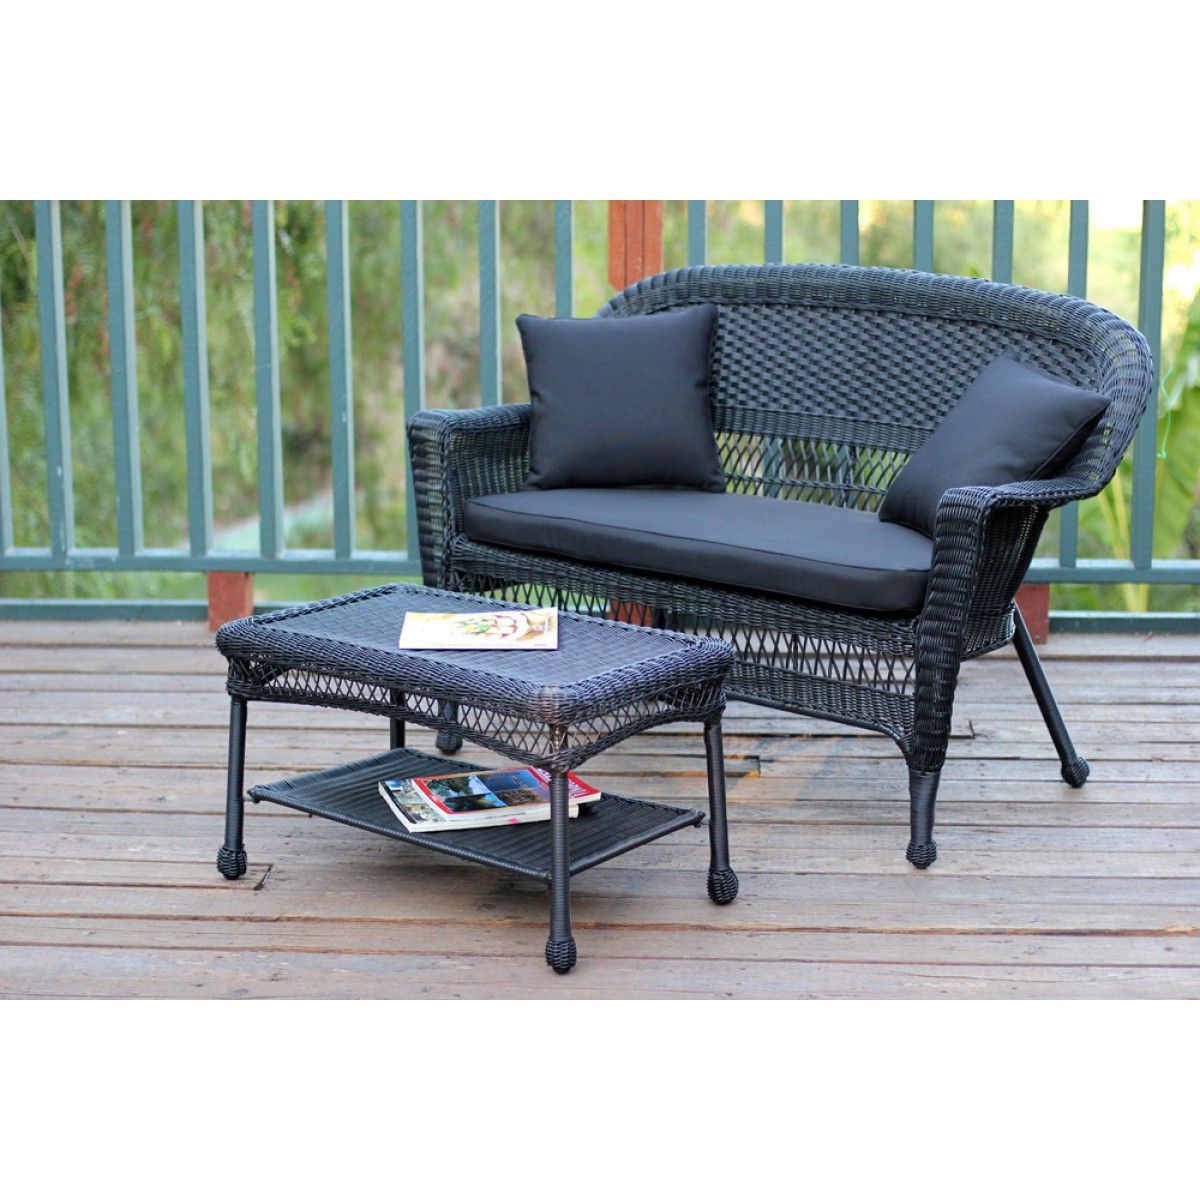 Black Wicker Patio Love Seat And Coffee Table Set With Regarding Black And Tan Rattan Coffee Tables (View 10 of 15)